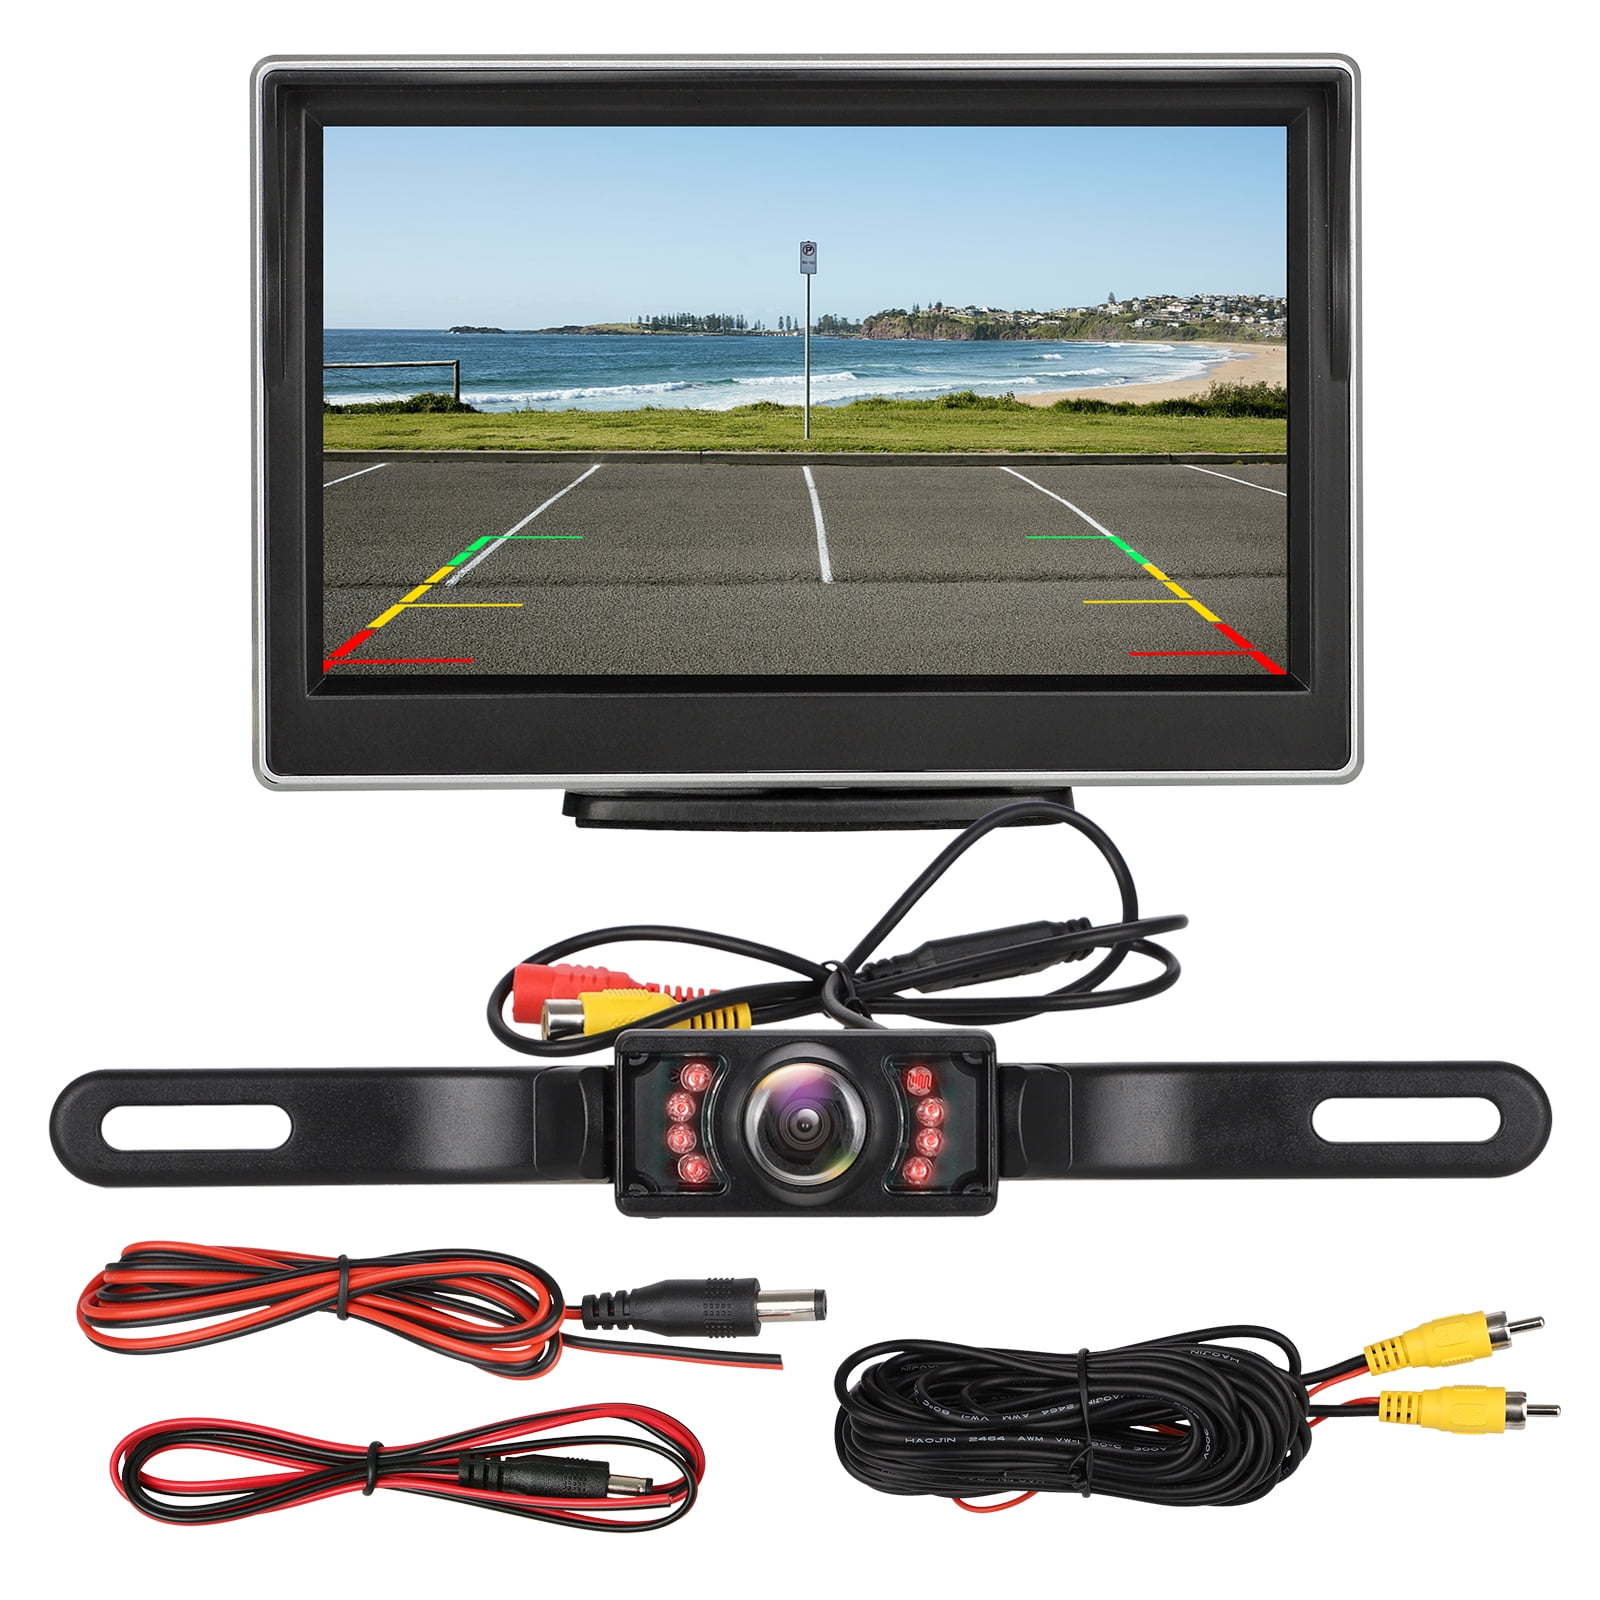 Built-in Wireless Car Cup Suction Monitor+Backup Camera Parking Rear View System 